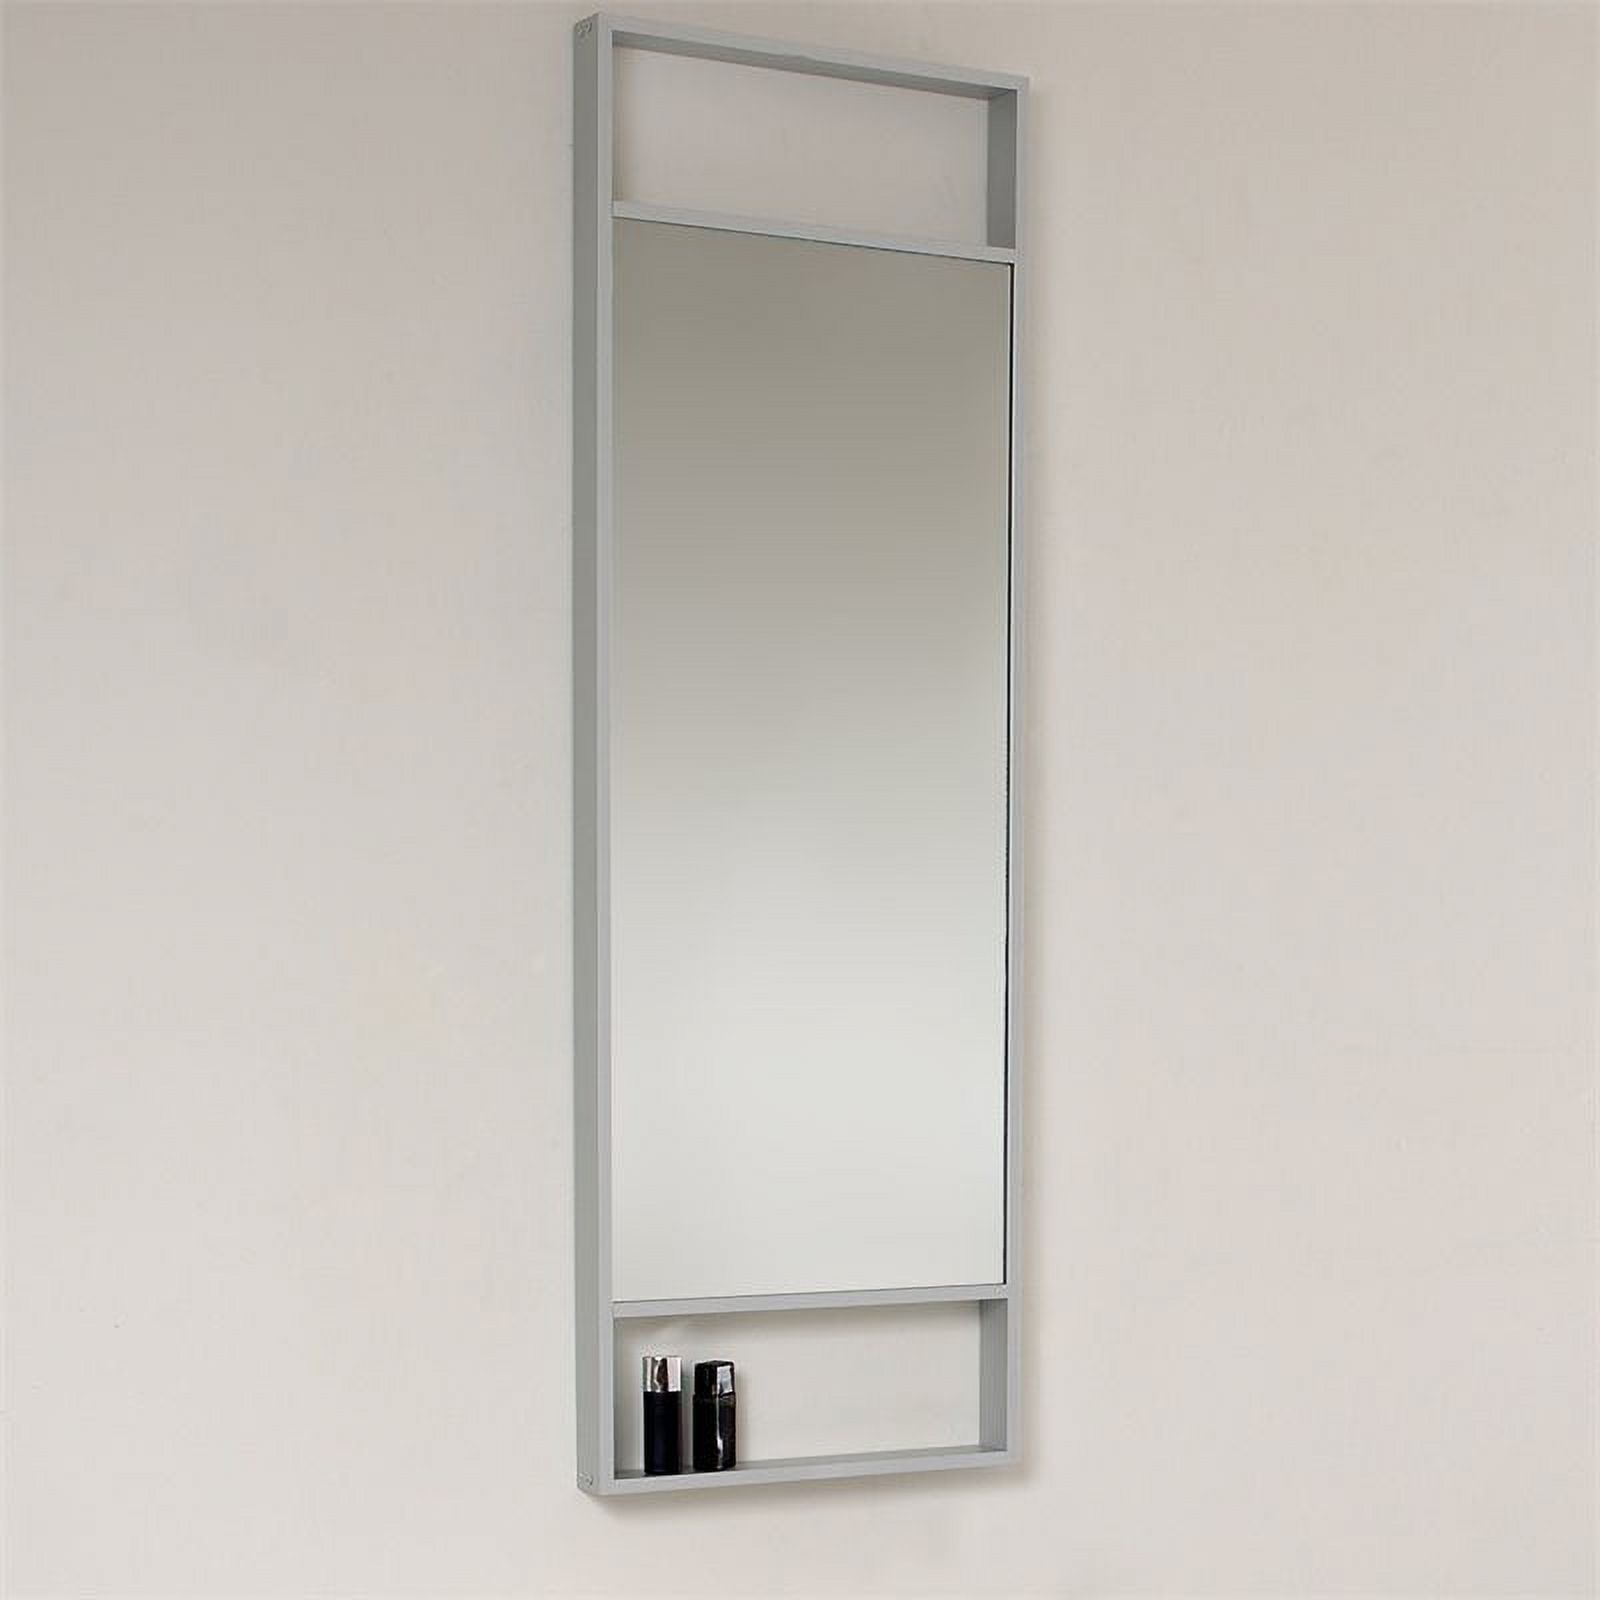 Pulito Small Modern Bathroom Vanity with Tall Mirror - image 5 of 7